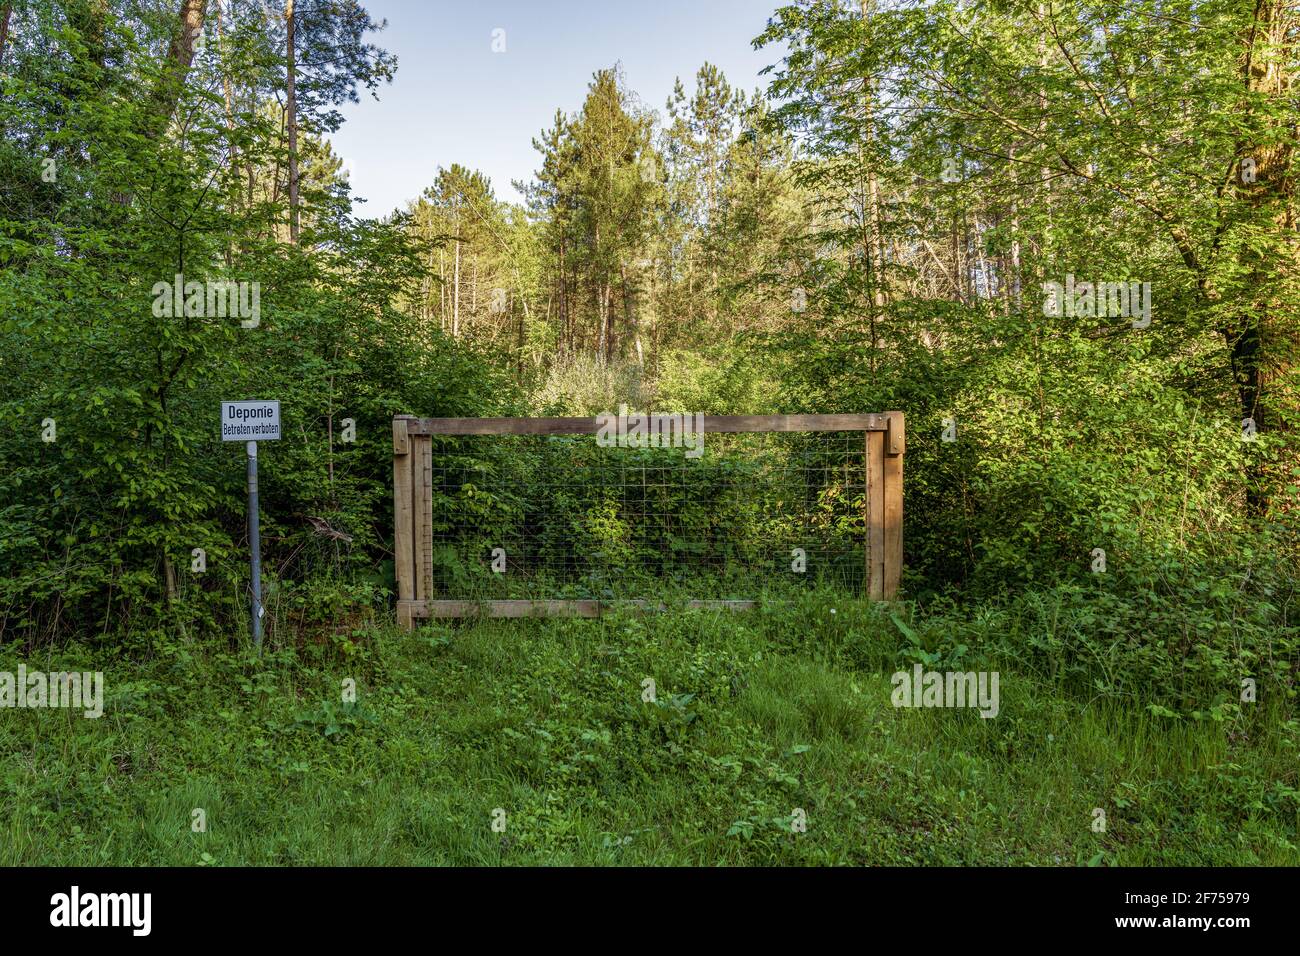 Closed gate with a sign: Deponie Betreten verboten (German for: Landfill, do not enter), seen in a forest in Ratingen, North Rhine-Westphalia, Germany Stock Photo